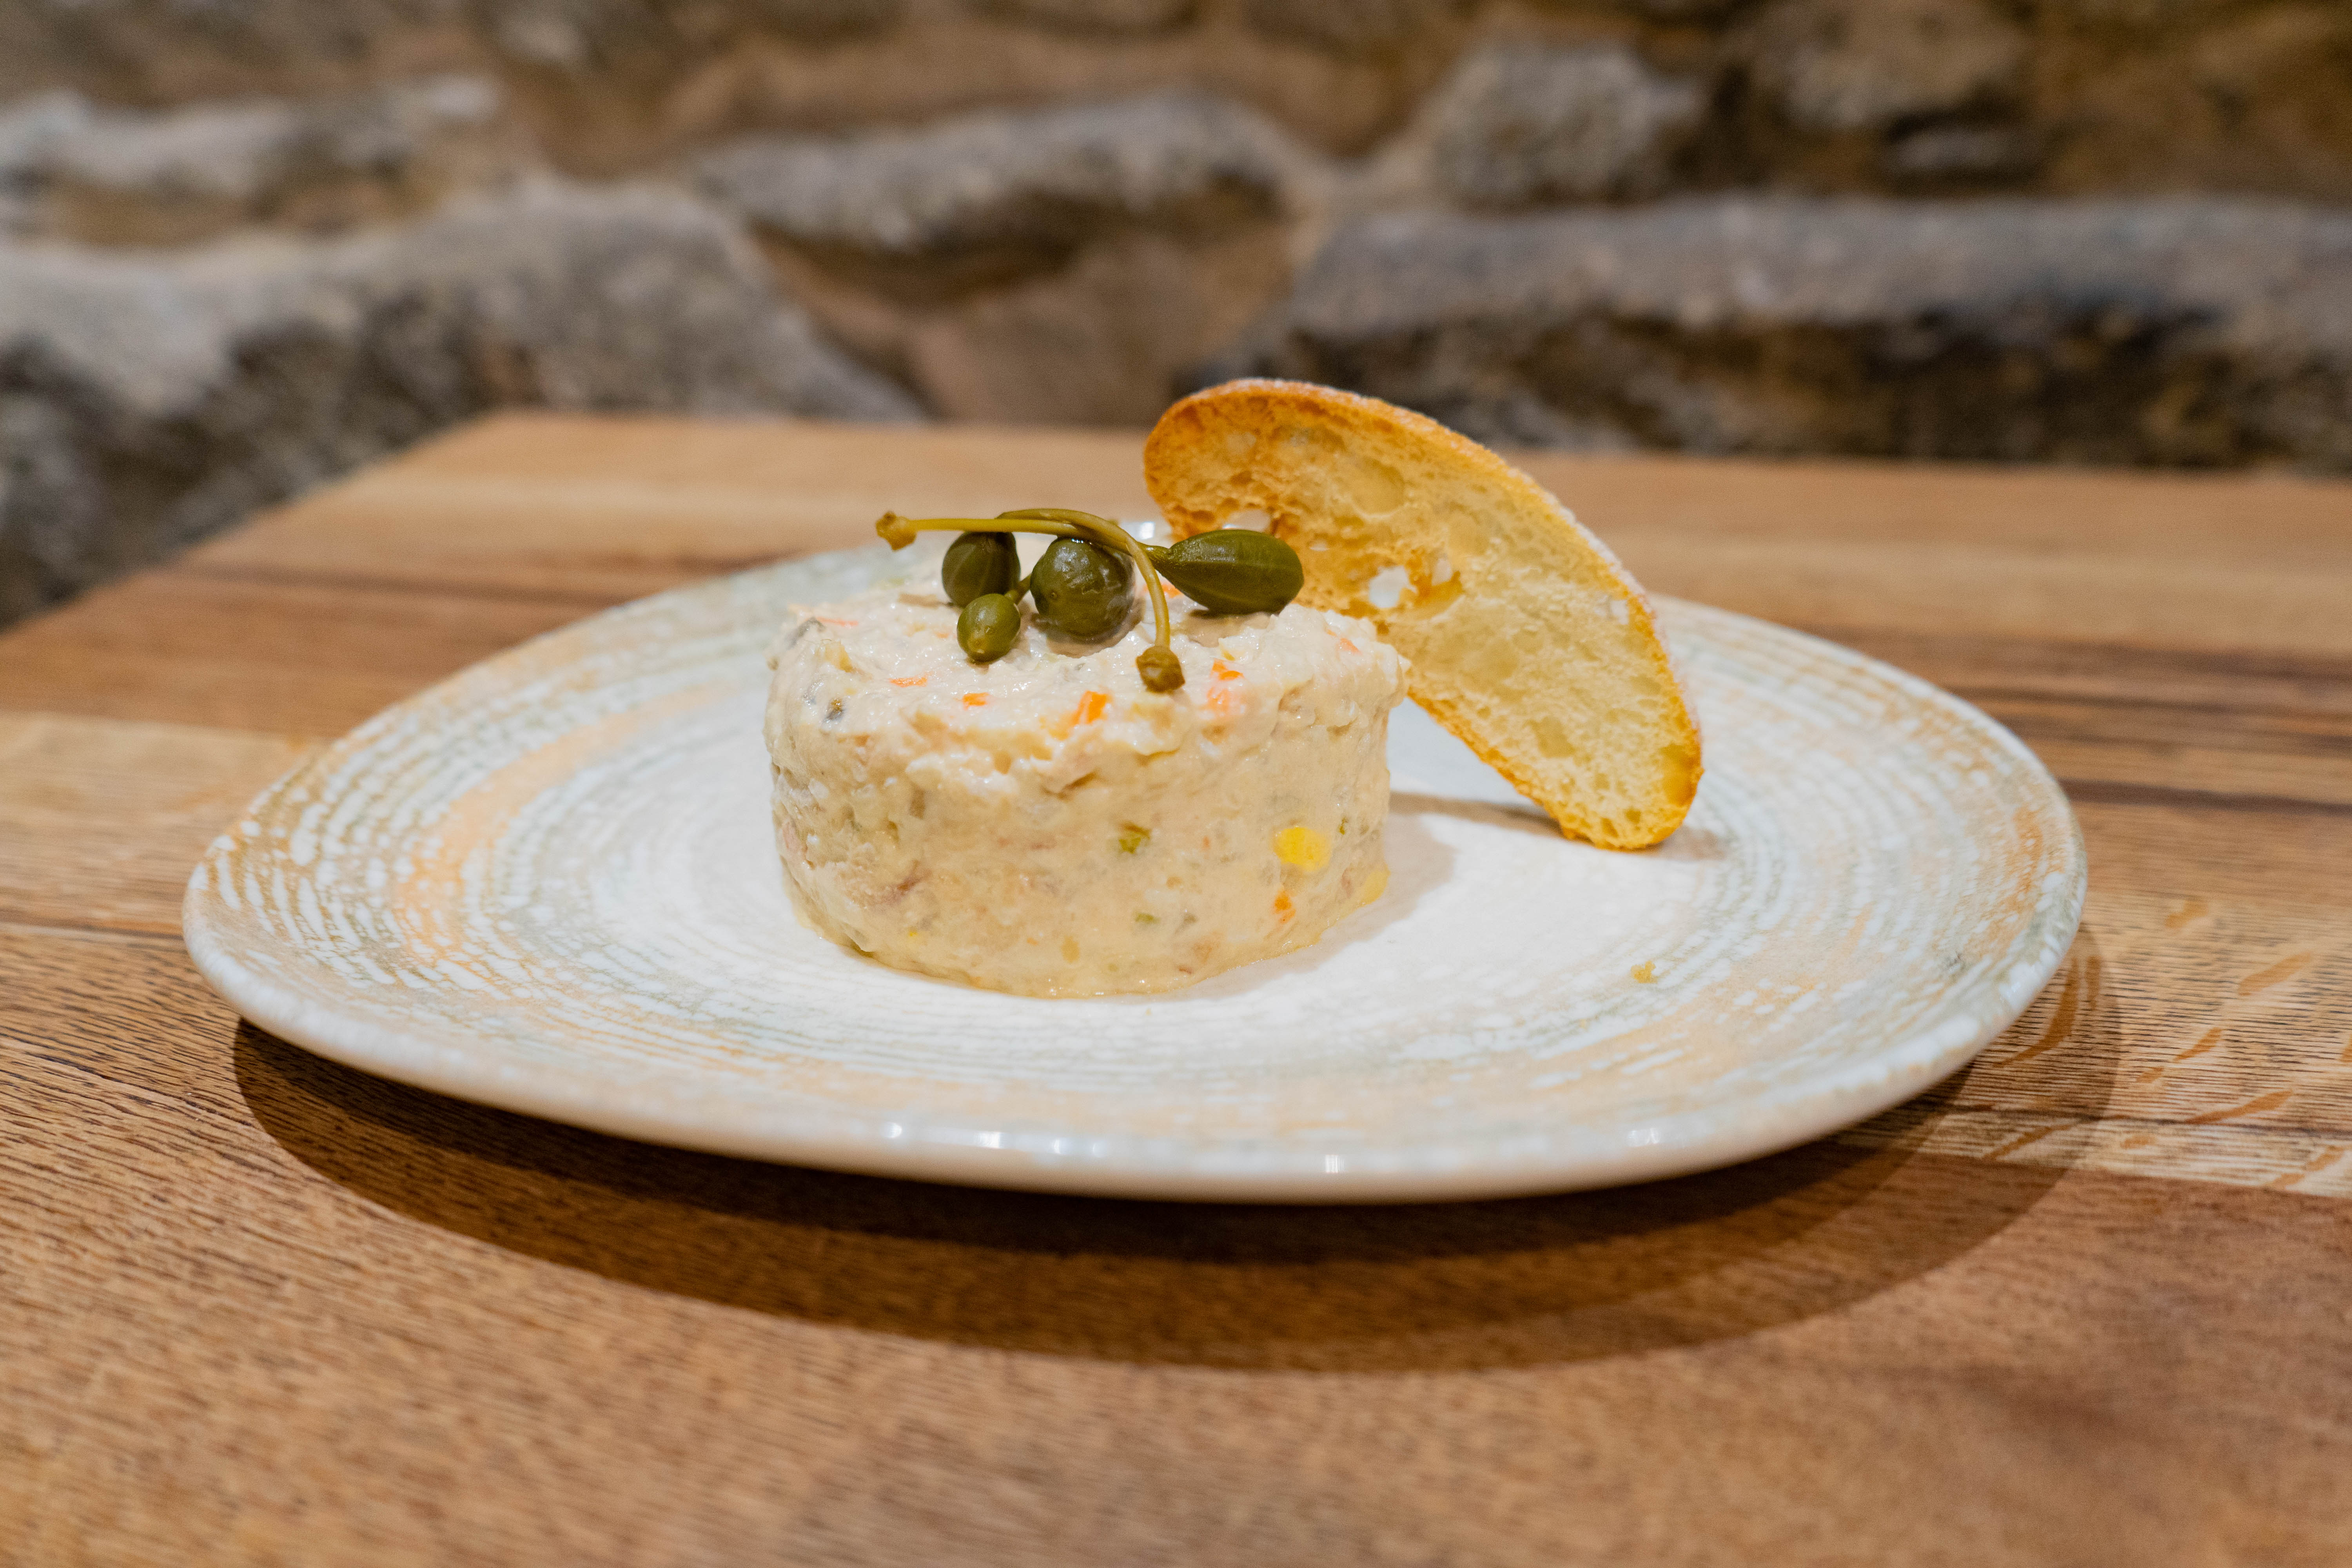  Russian salad with rustic rolls and capers